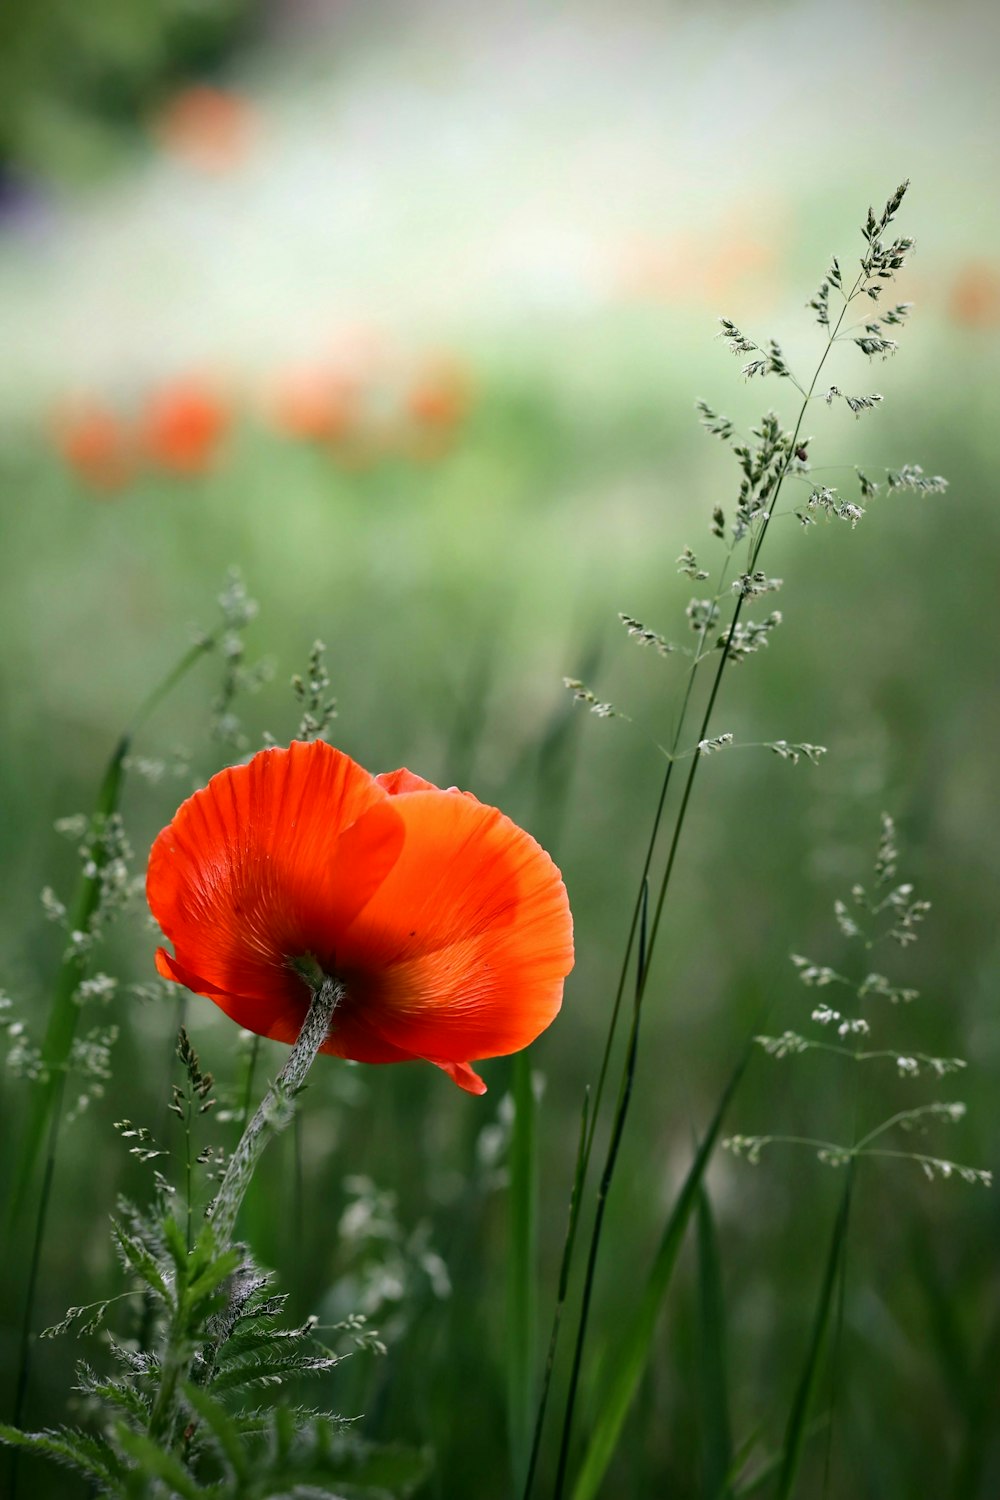 a red flower in a field of green grass